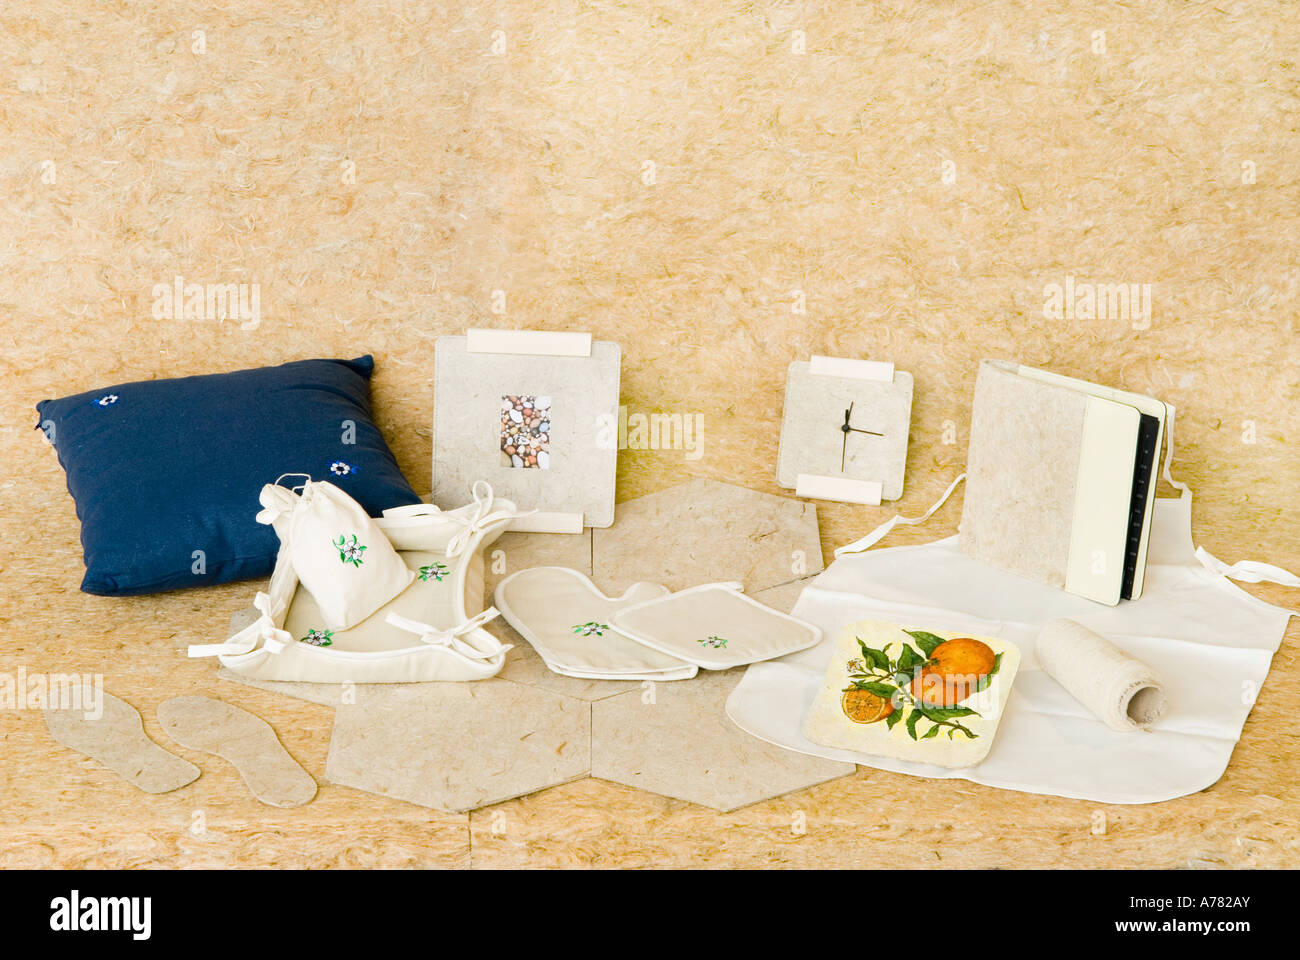 papers products made by kenaf Stock Photo - Alamy